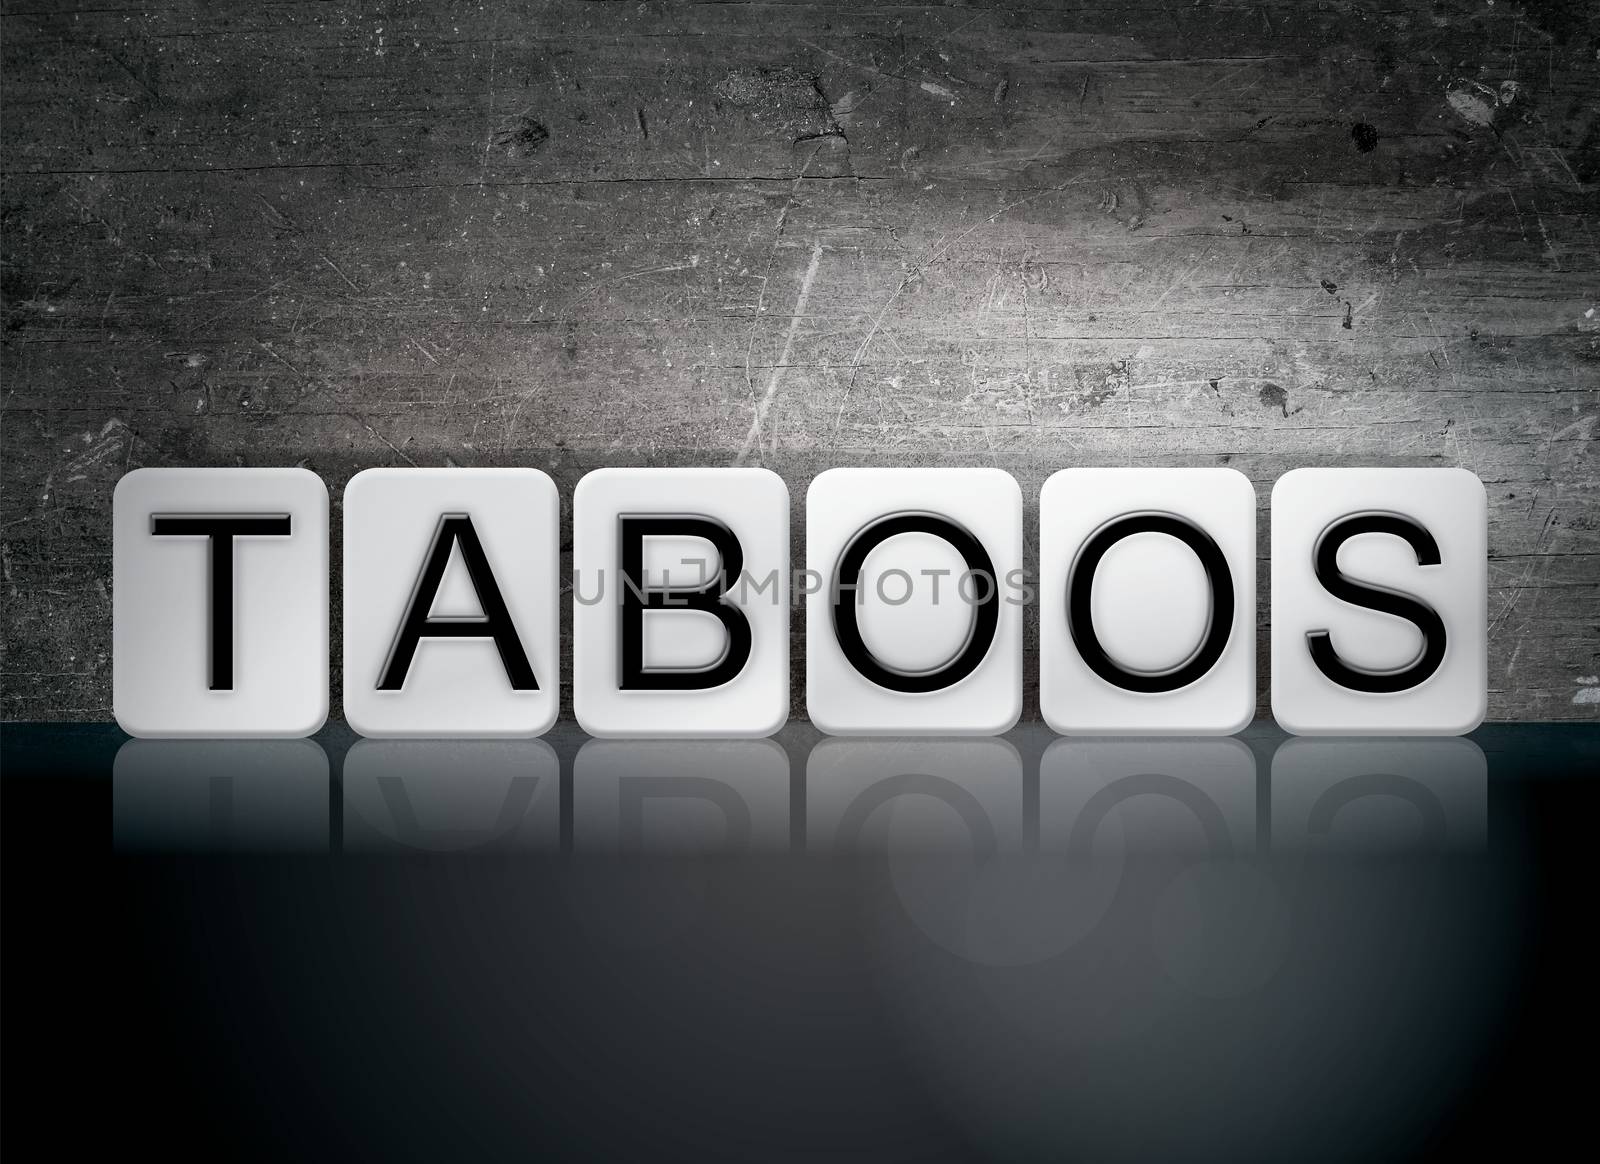 Taboos Tiled Letters Concept and Theme by enterlinedesign